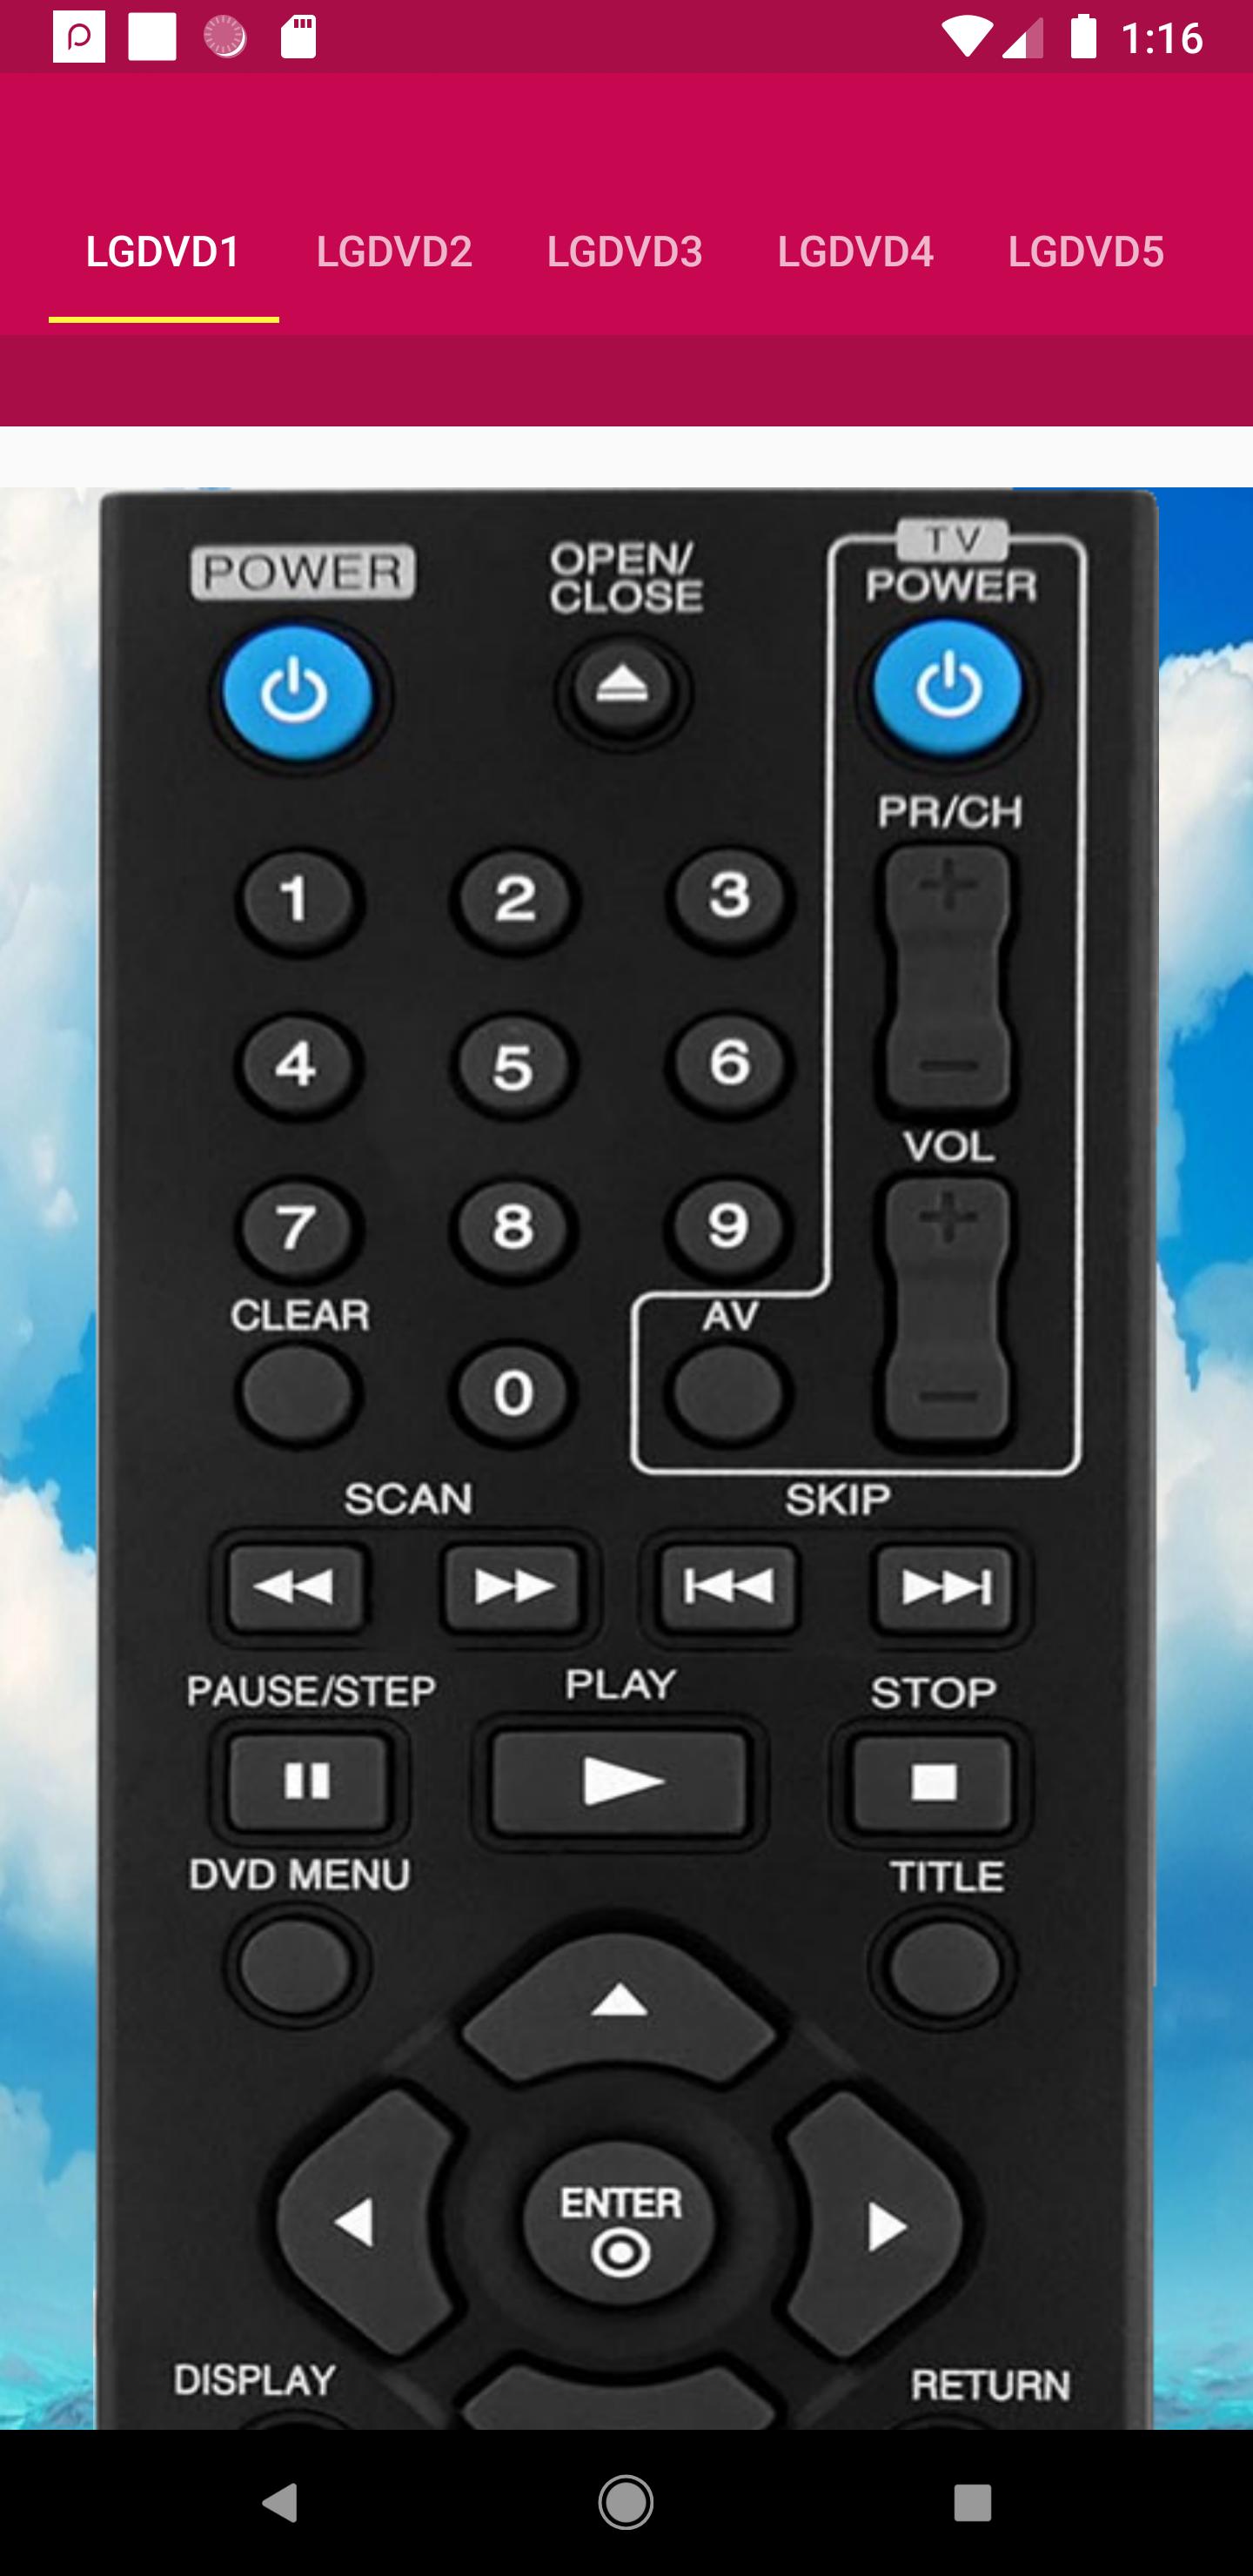 LG DVD Player Remote for Android - APK Download